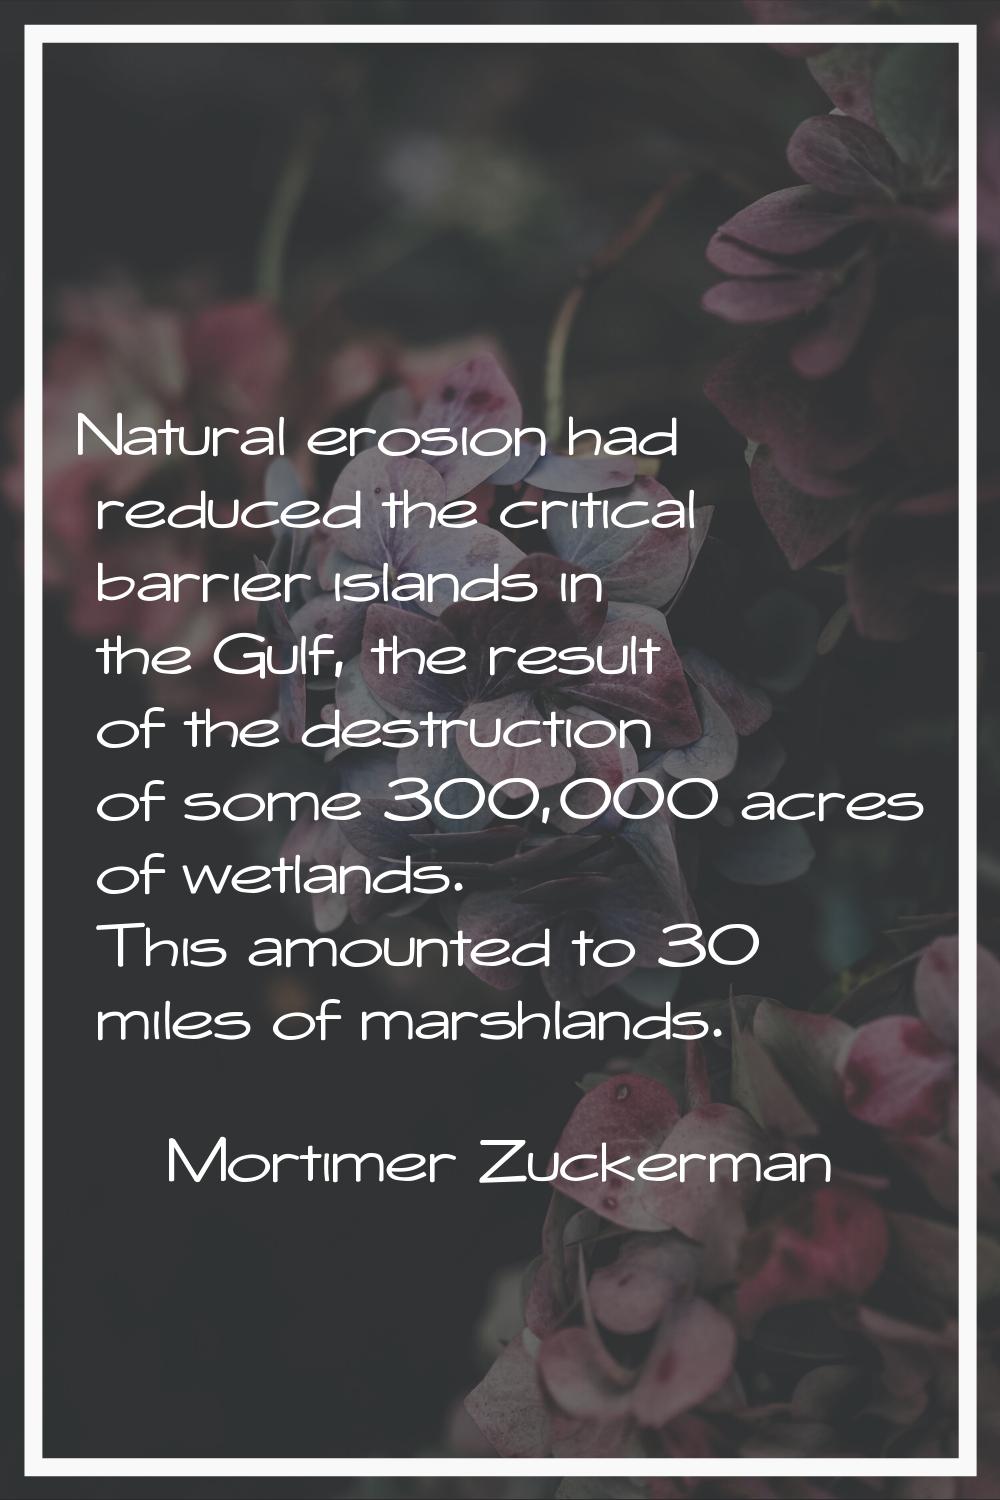 Natural erosion had reduced the critical barrier islands in the Gulf, the result of the destruction